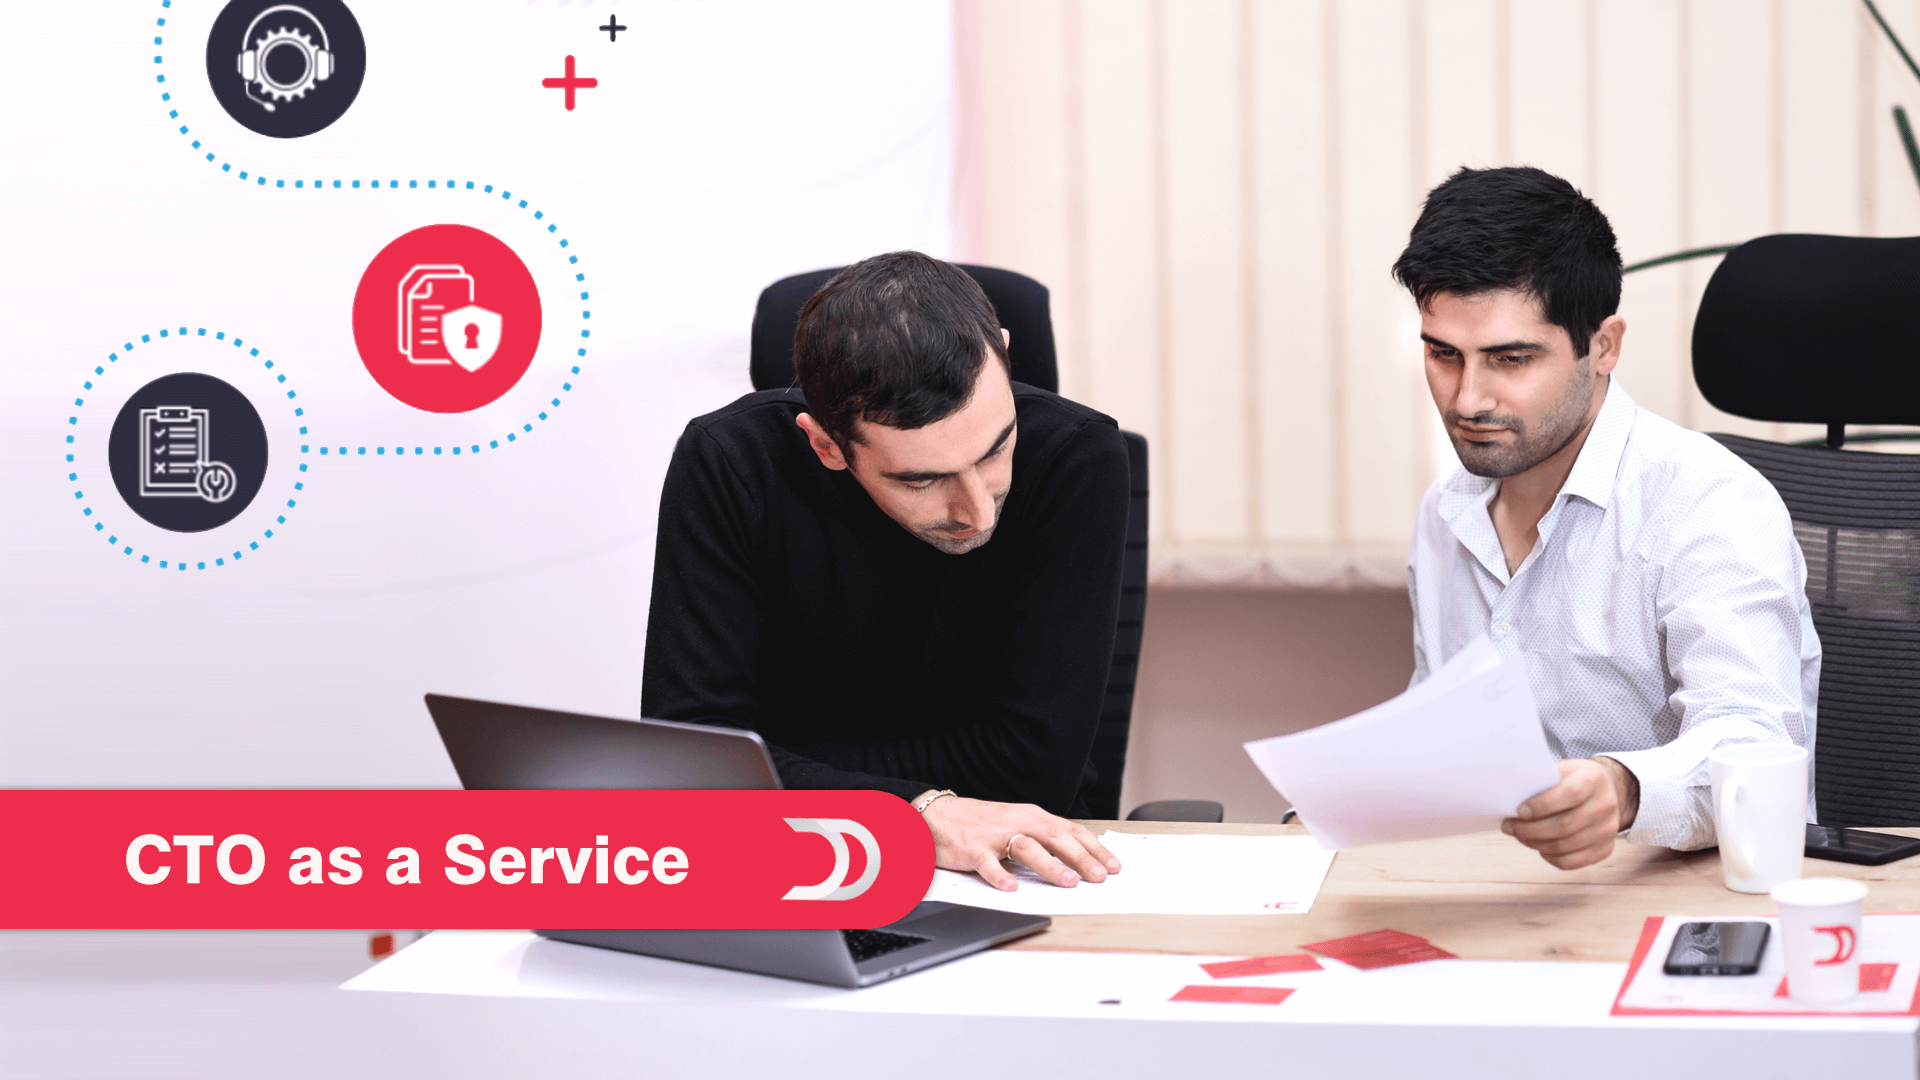 CTO as a Service: Ultimate Guide on Explaining the Service’s Top Practices, Tools, & Benefits 10